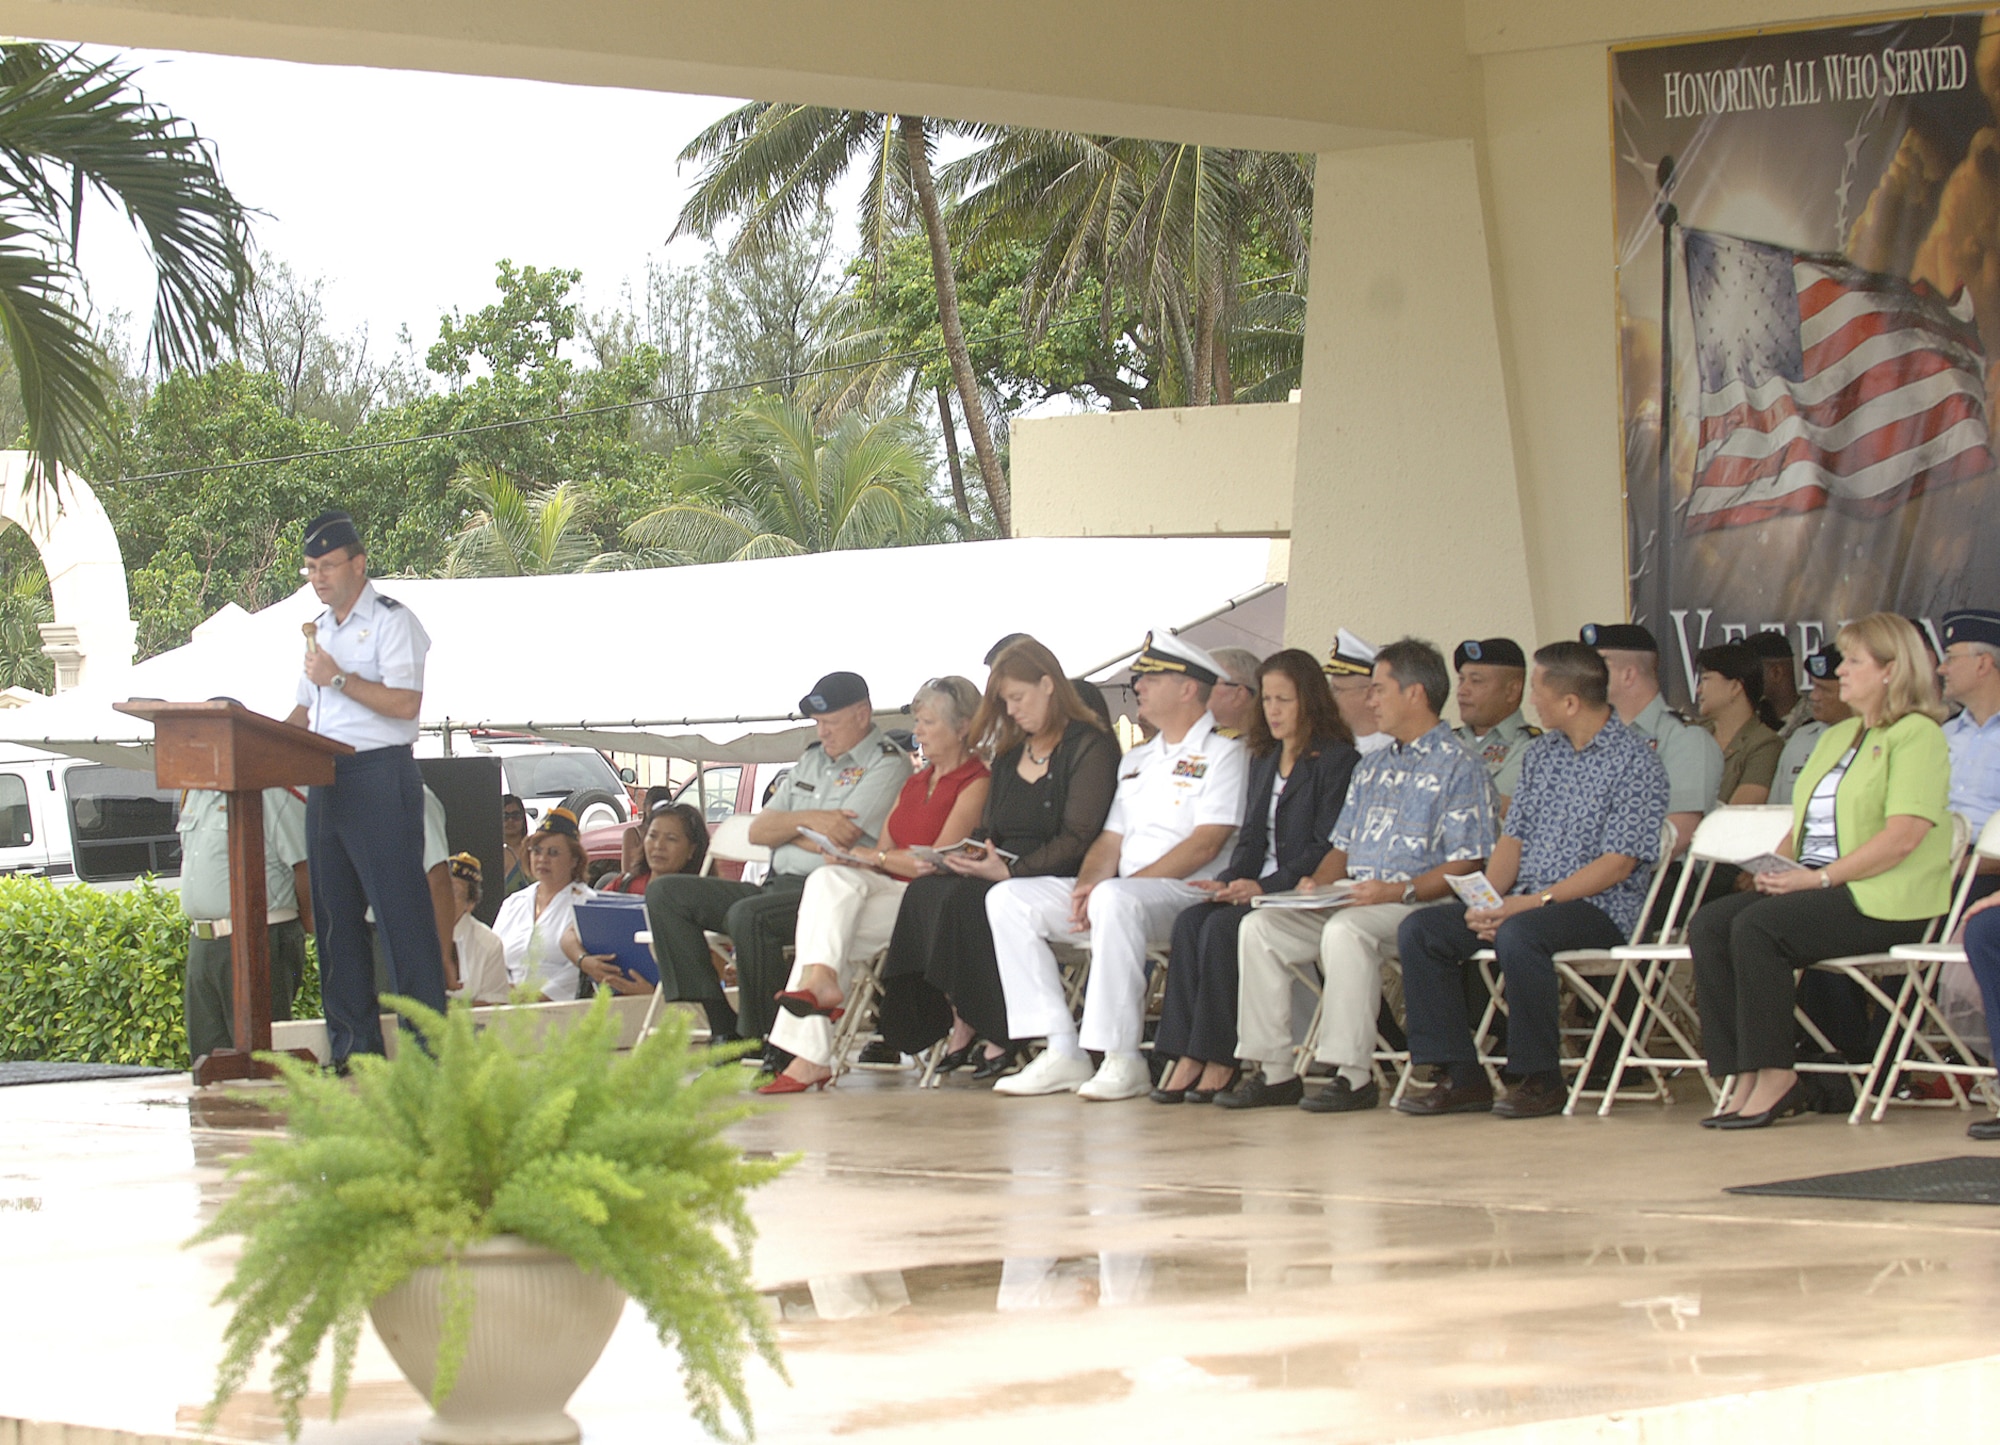 During the Veterans Day Ceremony Nov. 11 at the Ricardo J. Bordallo Governor's Complex, keynote speaker, Brig. Gen. Douglas Owens, 36th Wing commander, spoke of the sacrifice made by more than 24 million veterans across the United States.